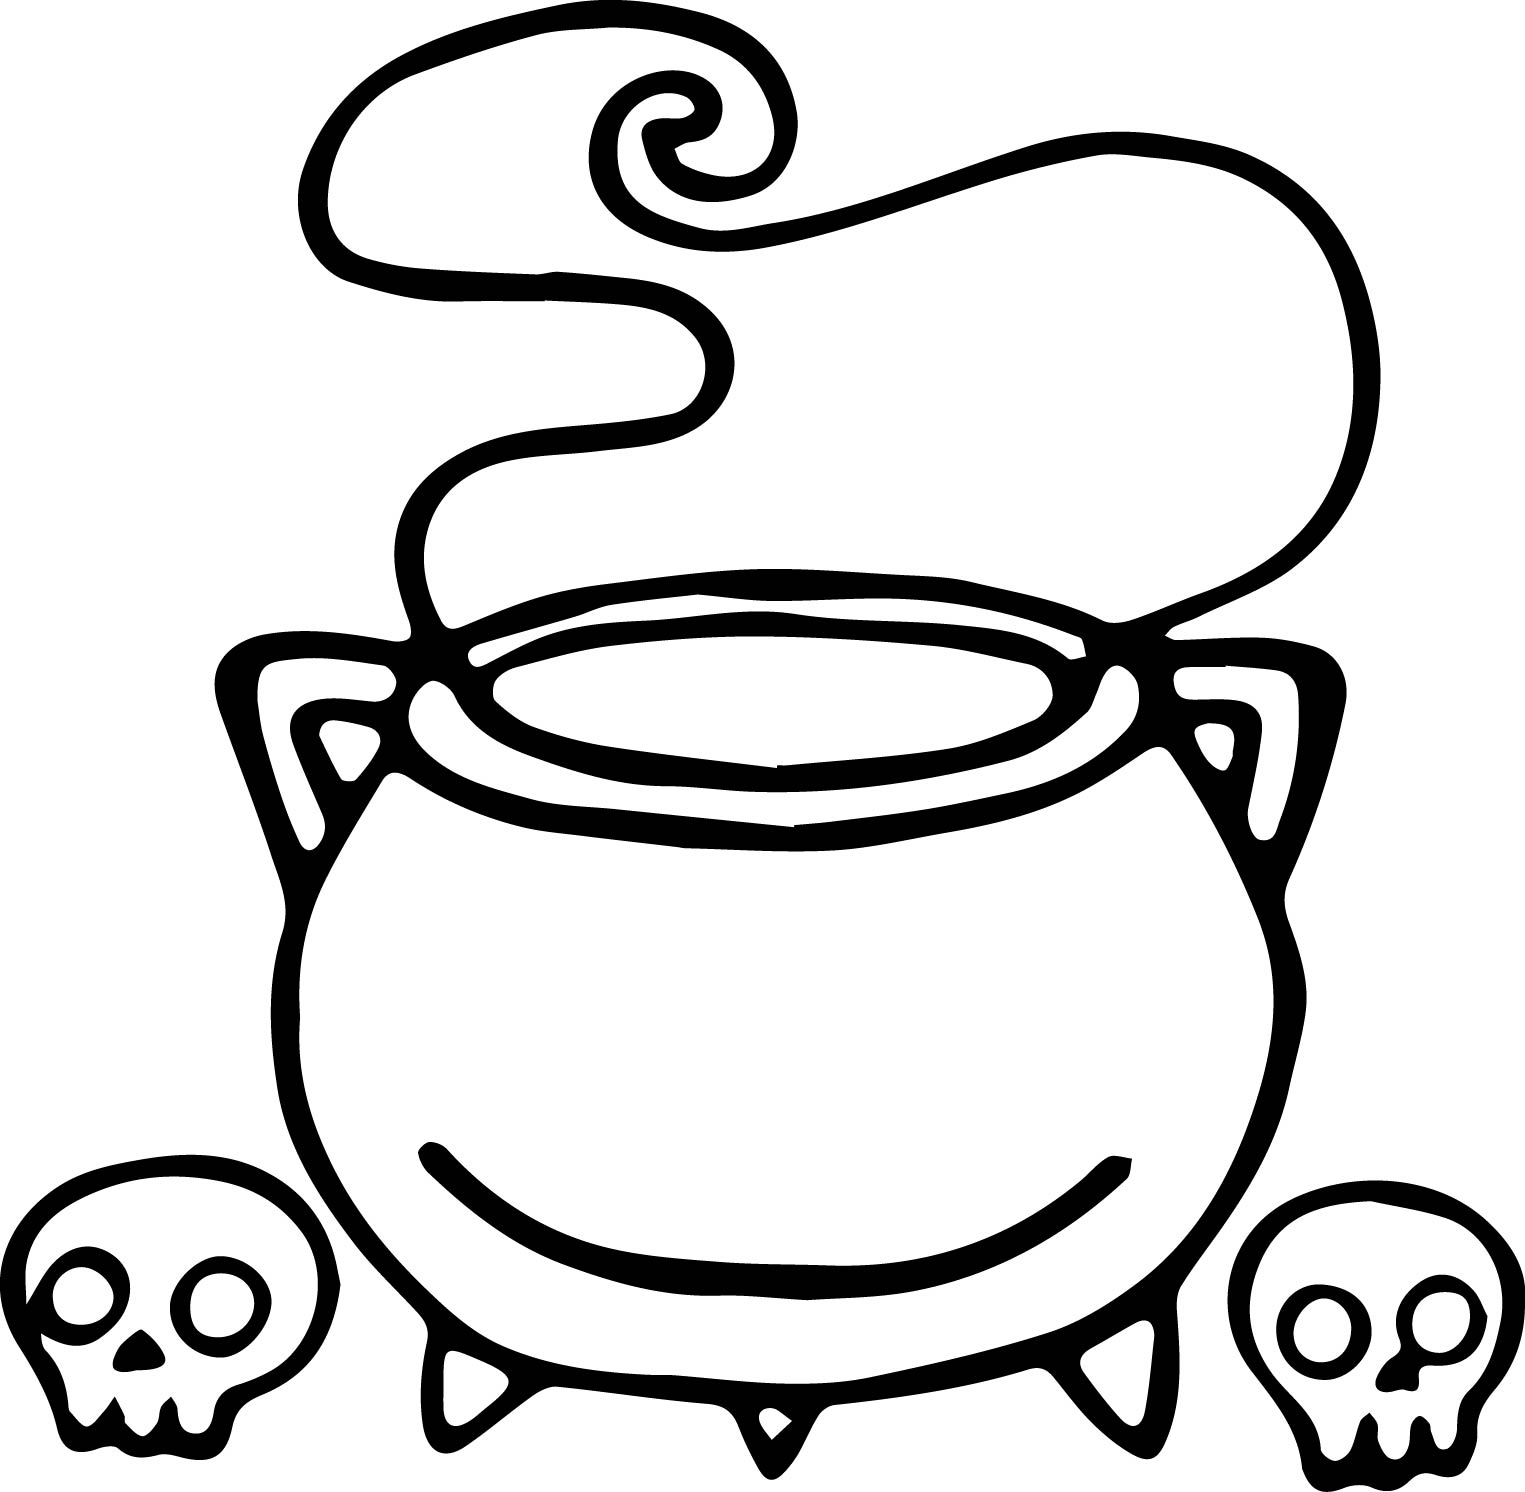 Witch Cauldron Halloween Drawing Coloring Page | Wecoloringpage.com